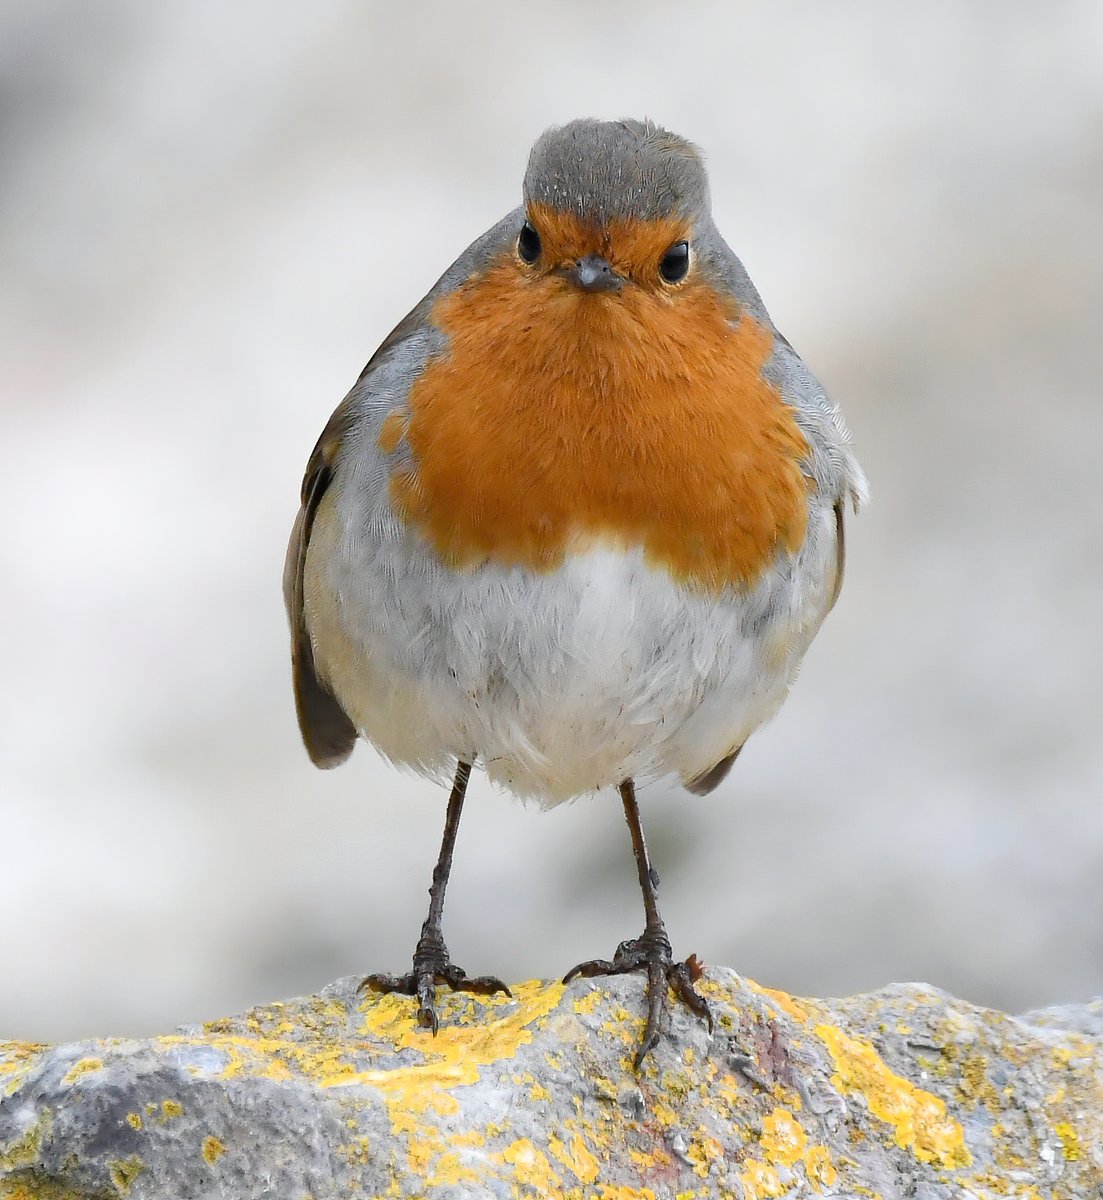 As it's Friday, I'm asking all my followers to please retweet this photo of a grumpy Robin on a rock. 🙏♥️ Help my little bird account to beat the algorithm and be seen.🙏 Thank you so much!🥰 #FridayRetweetPlease 😊 ♥️